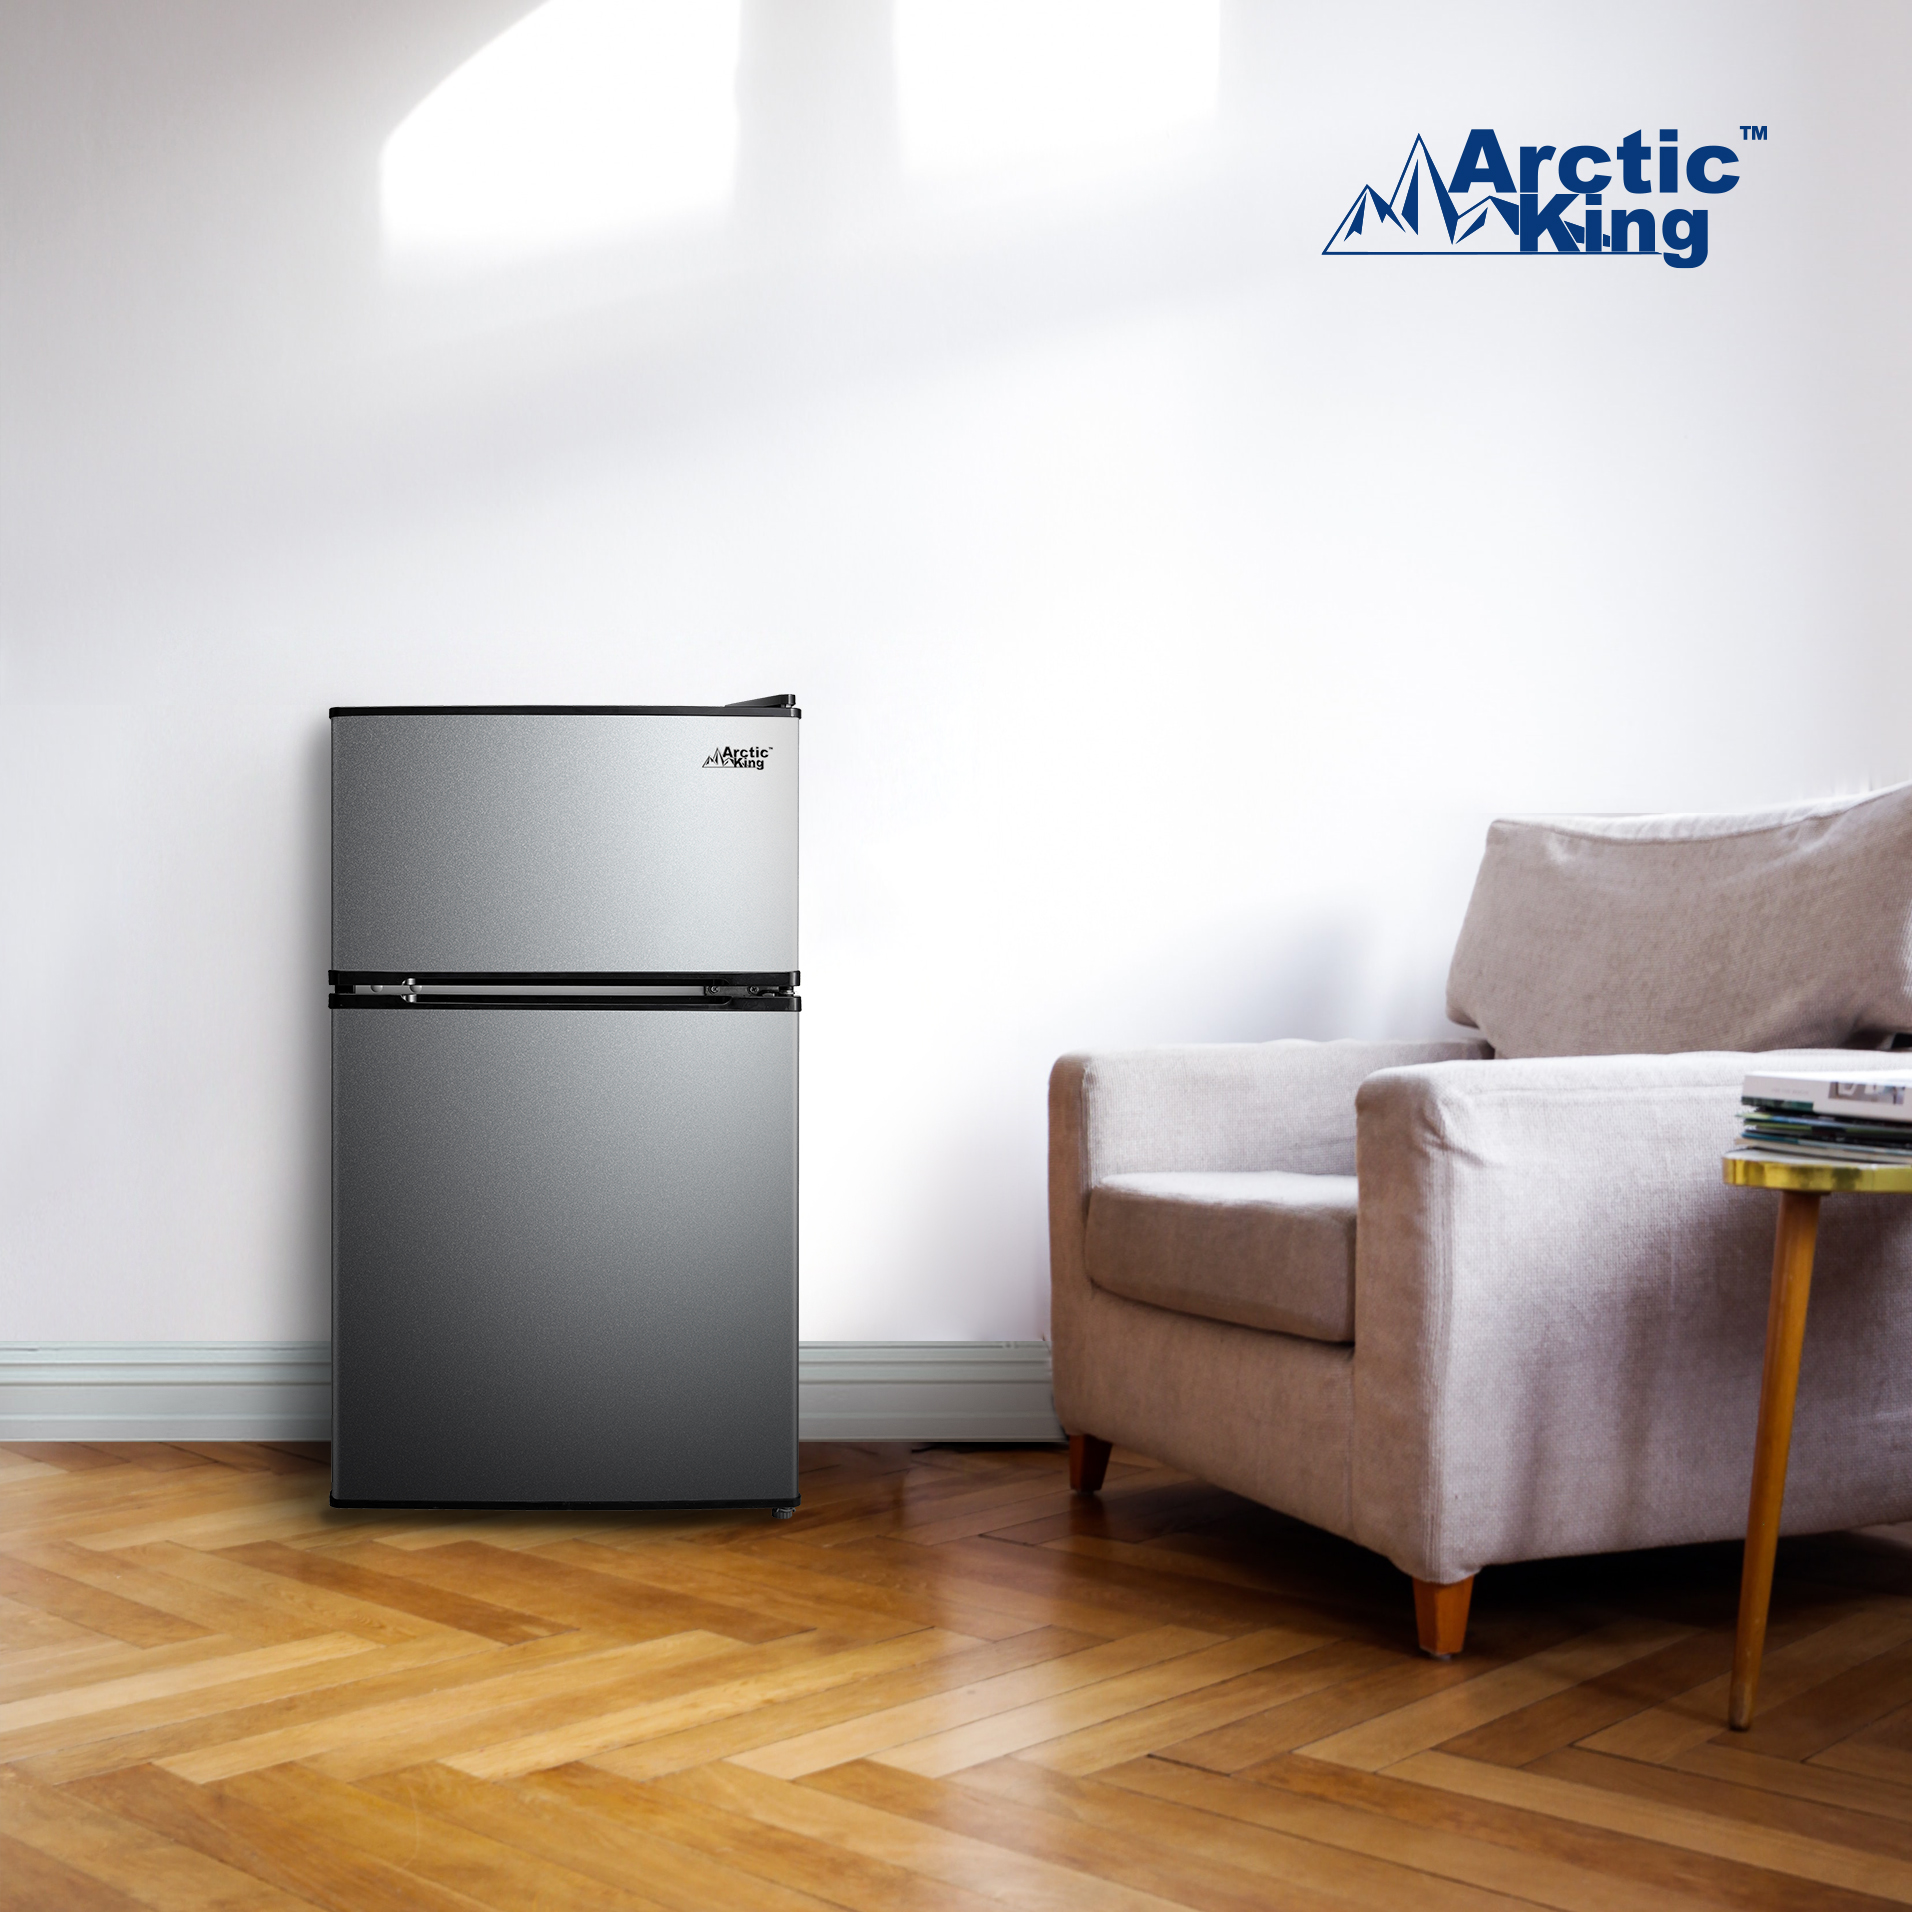 Arctic King 3.2 Cu ft Two Door Mini Fridge with Freezer, Stainless Steel, E-Star, ARM32D5ASL - image 19 of 21